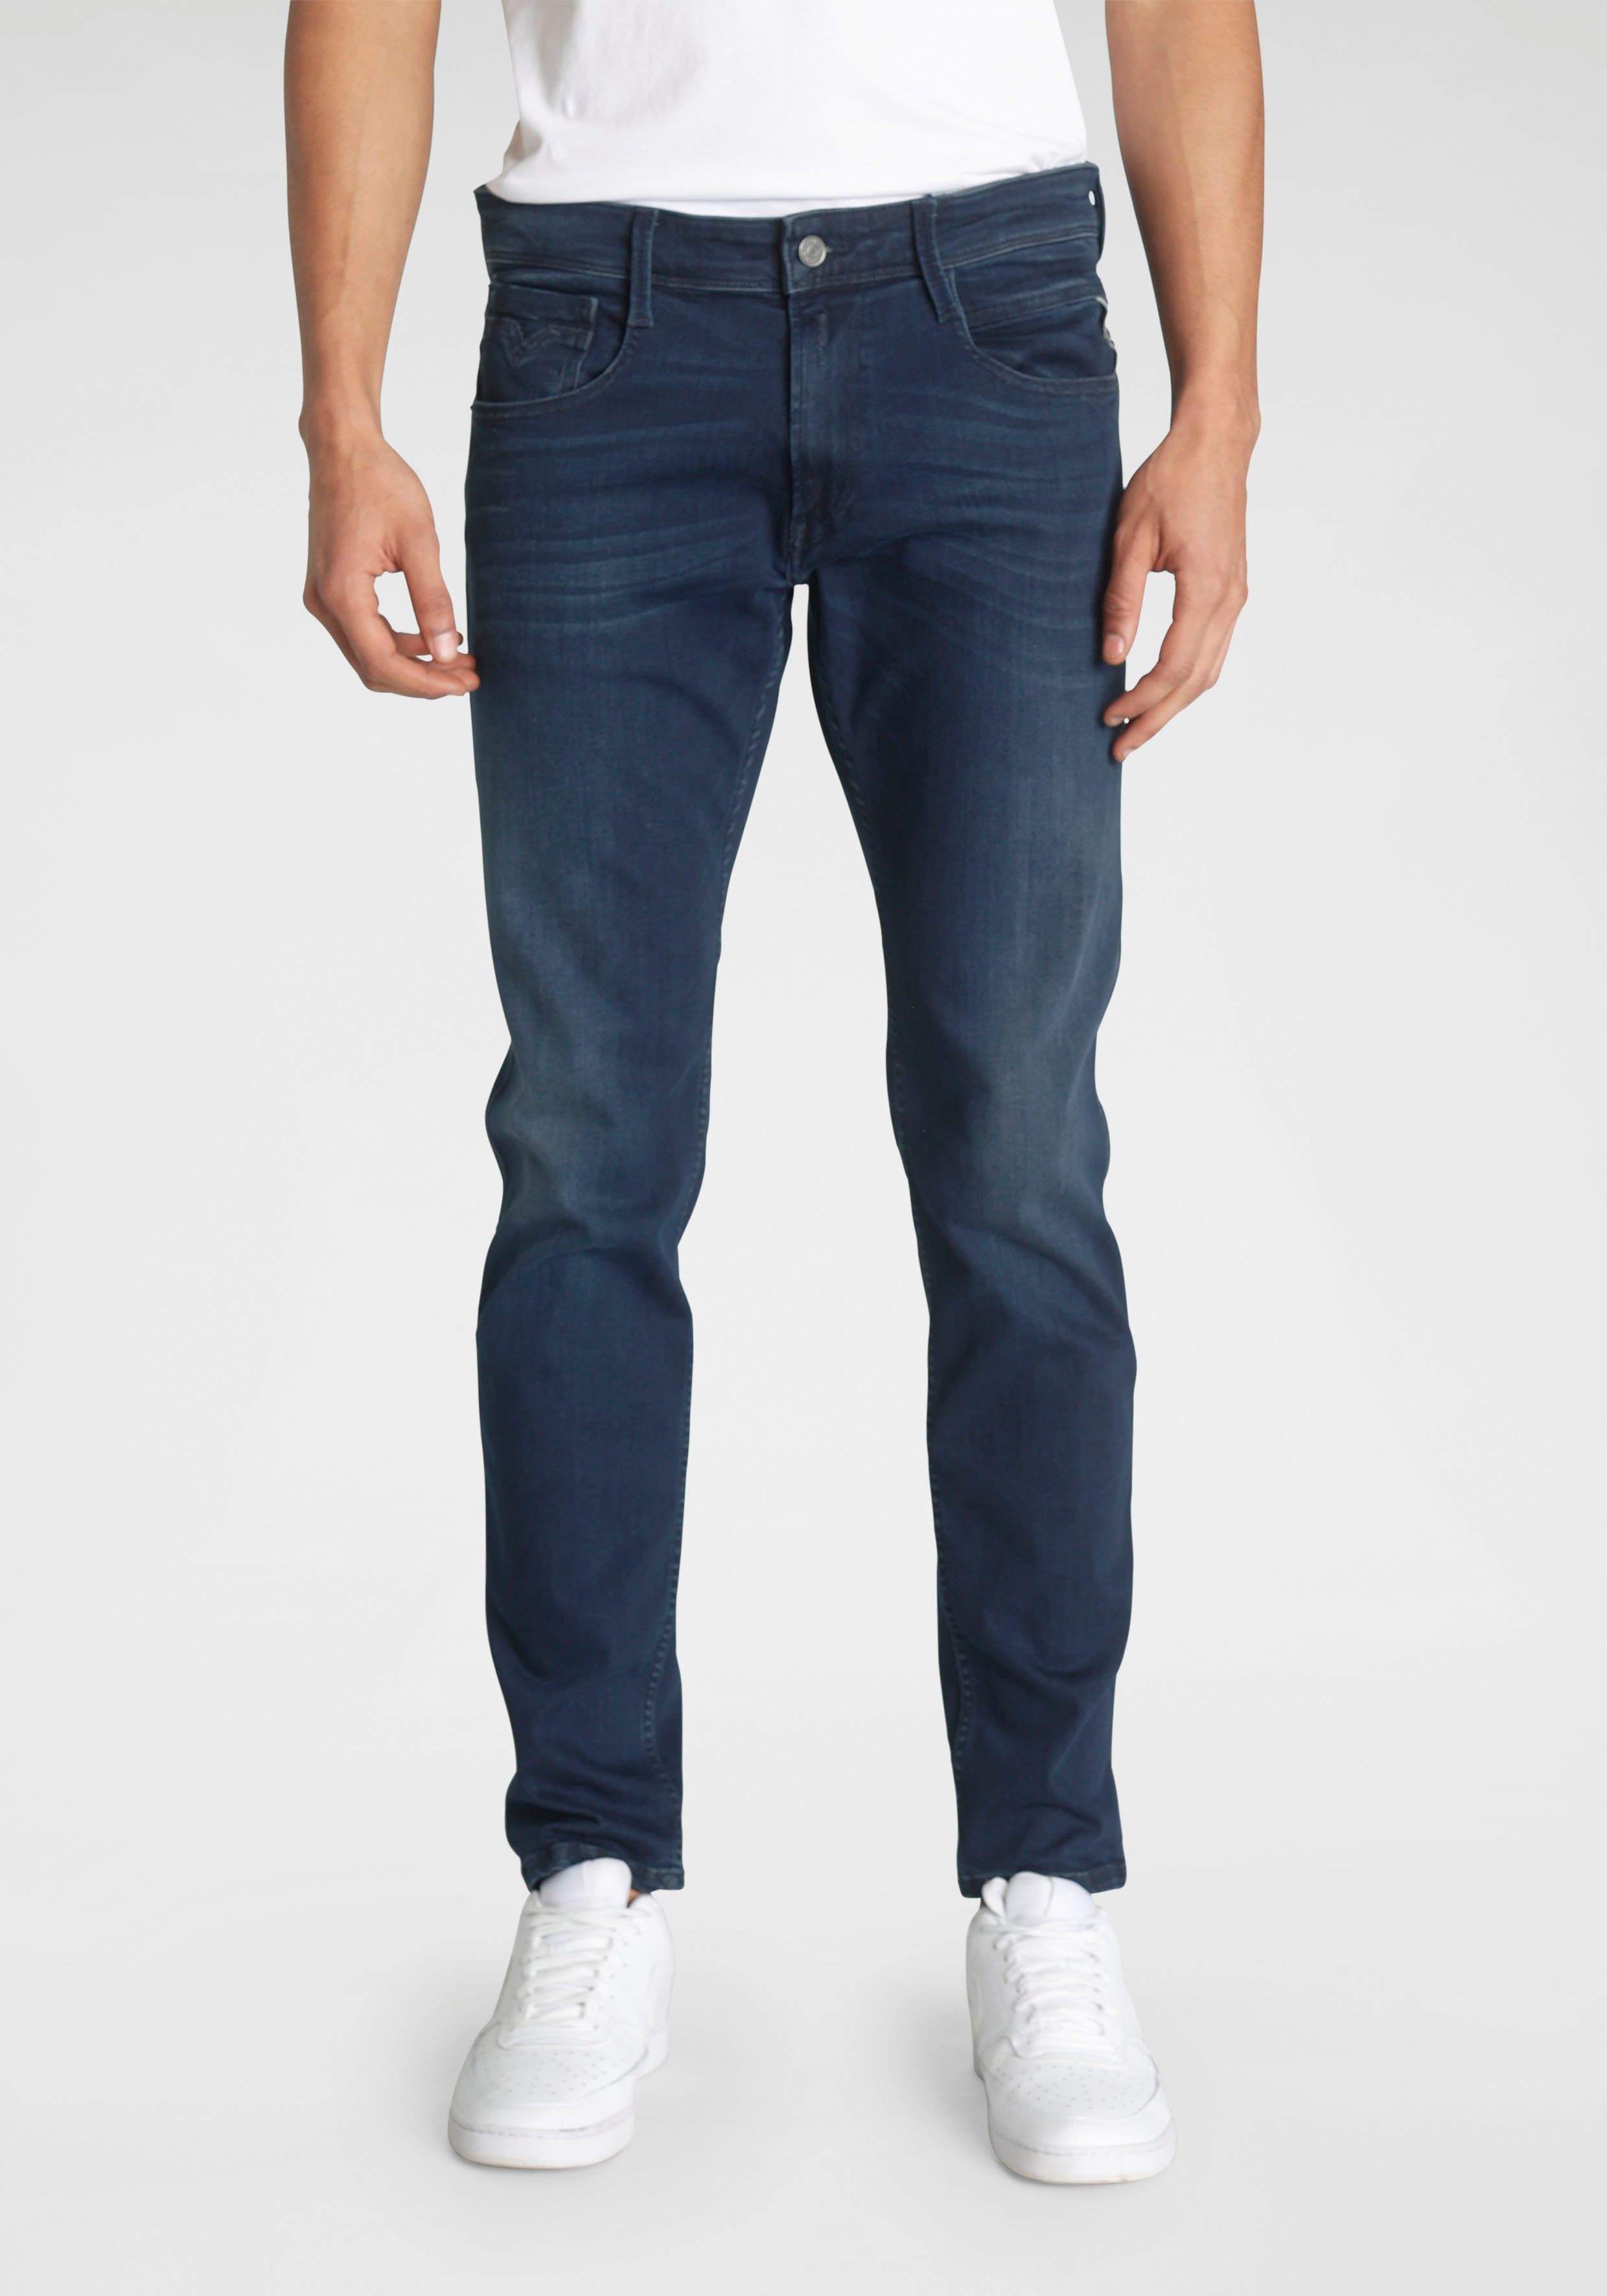 dark-blue-wash Slim-fit-Jeans Superstretch Replay Anbass